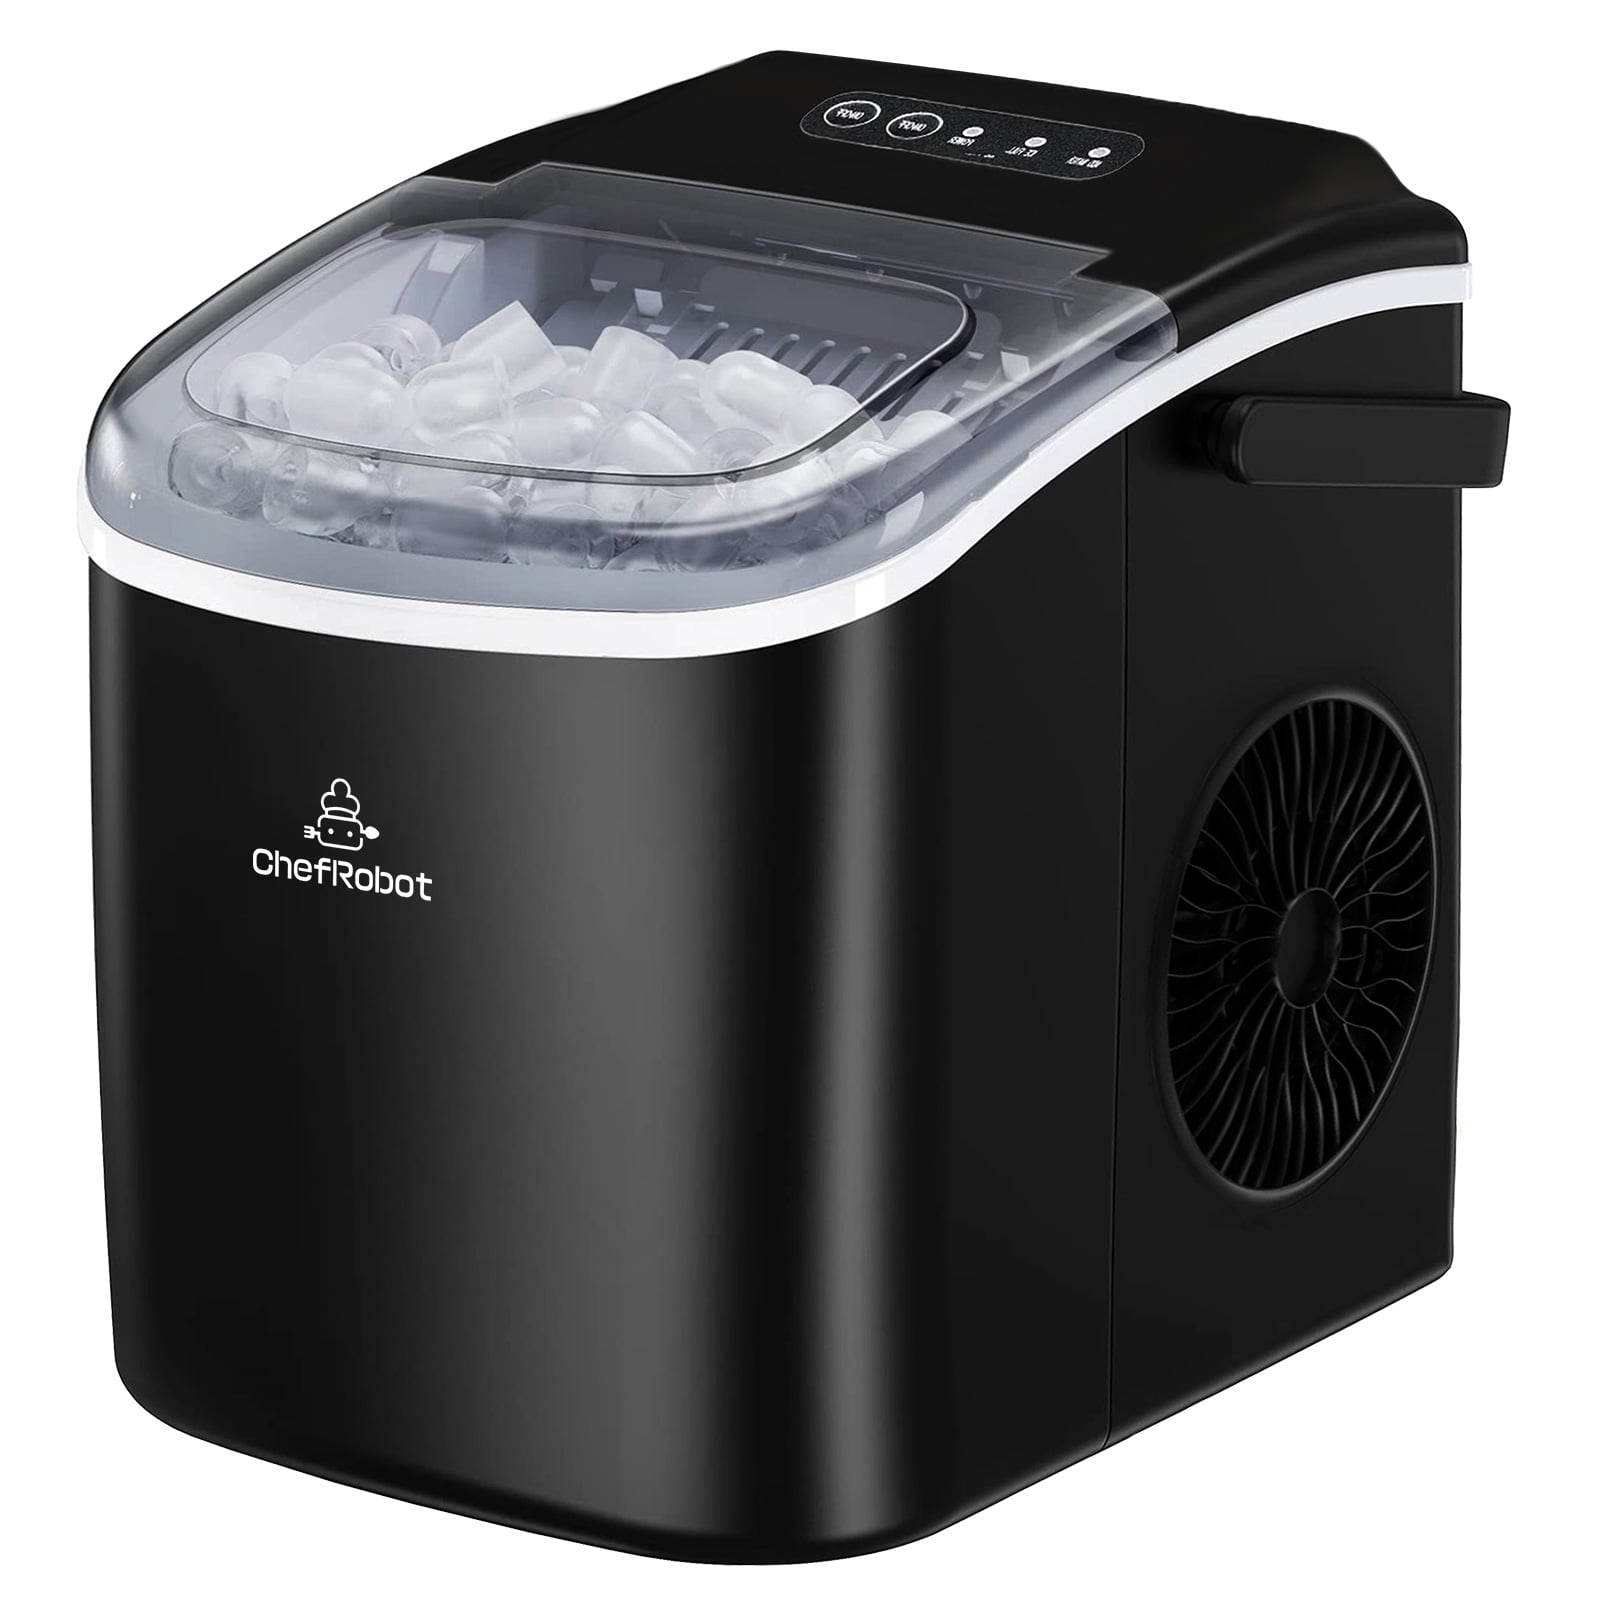 ChefRobot Ice Maker Countertop, Self-Cleaning Ice Maker with Ice Scoop and  Basket, Make 26.5 lbs Ice in 24 Hrs, 9 Ice Cubes Ready in 6-8 Mins, Black 